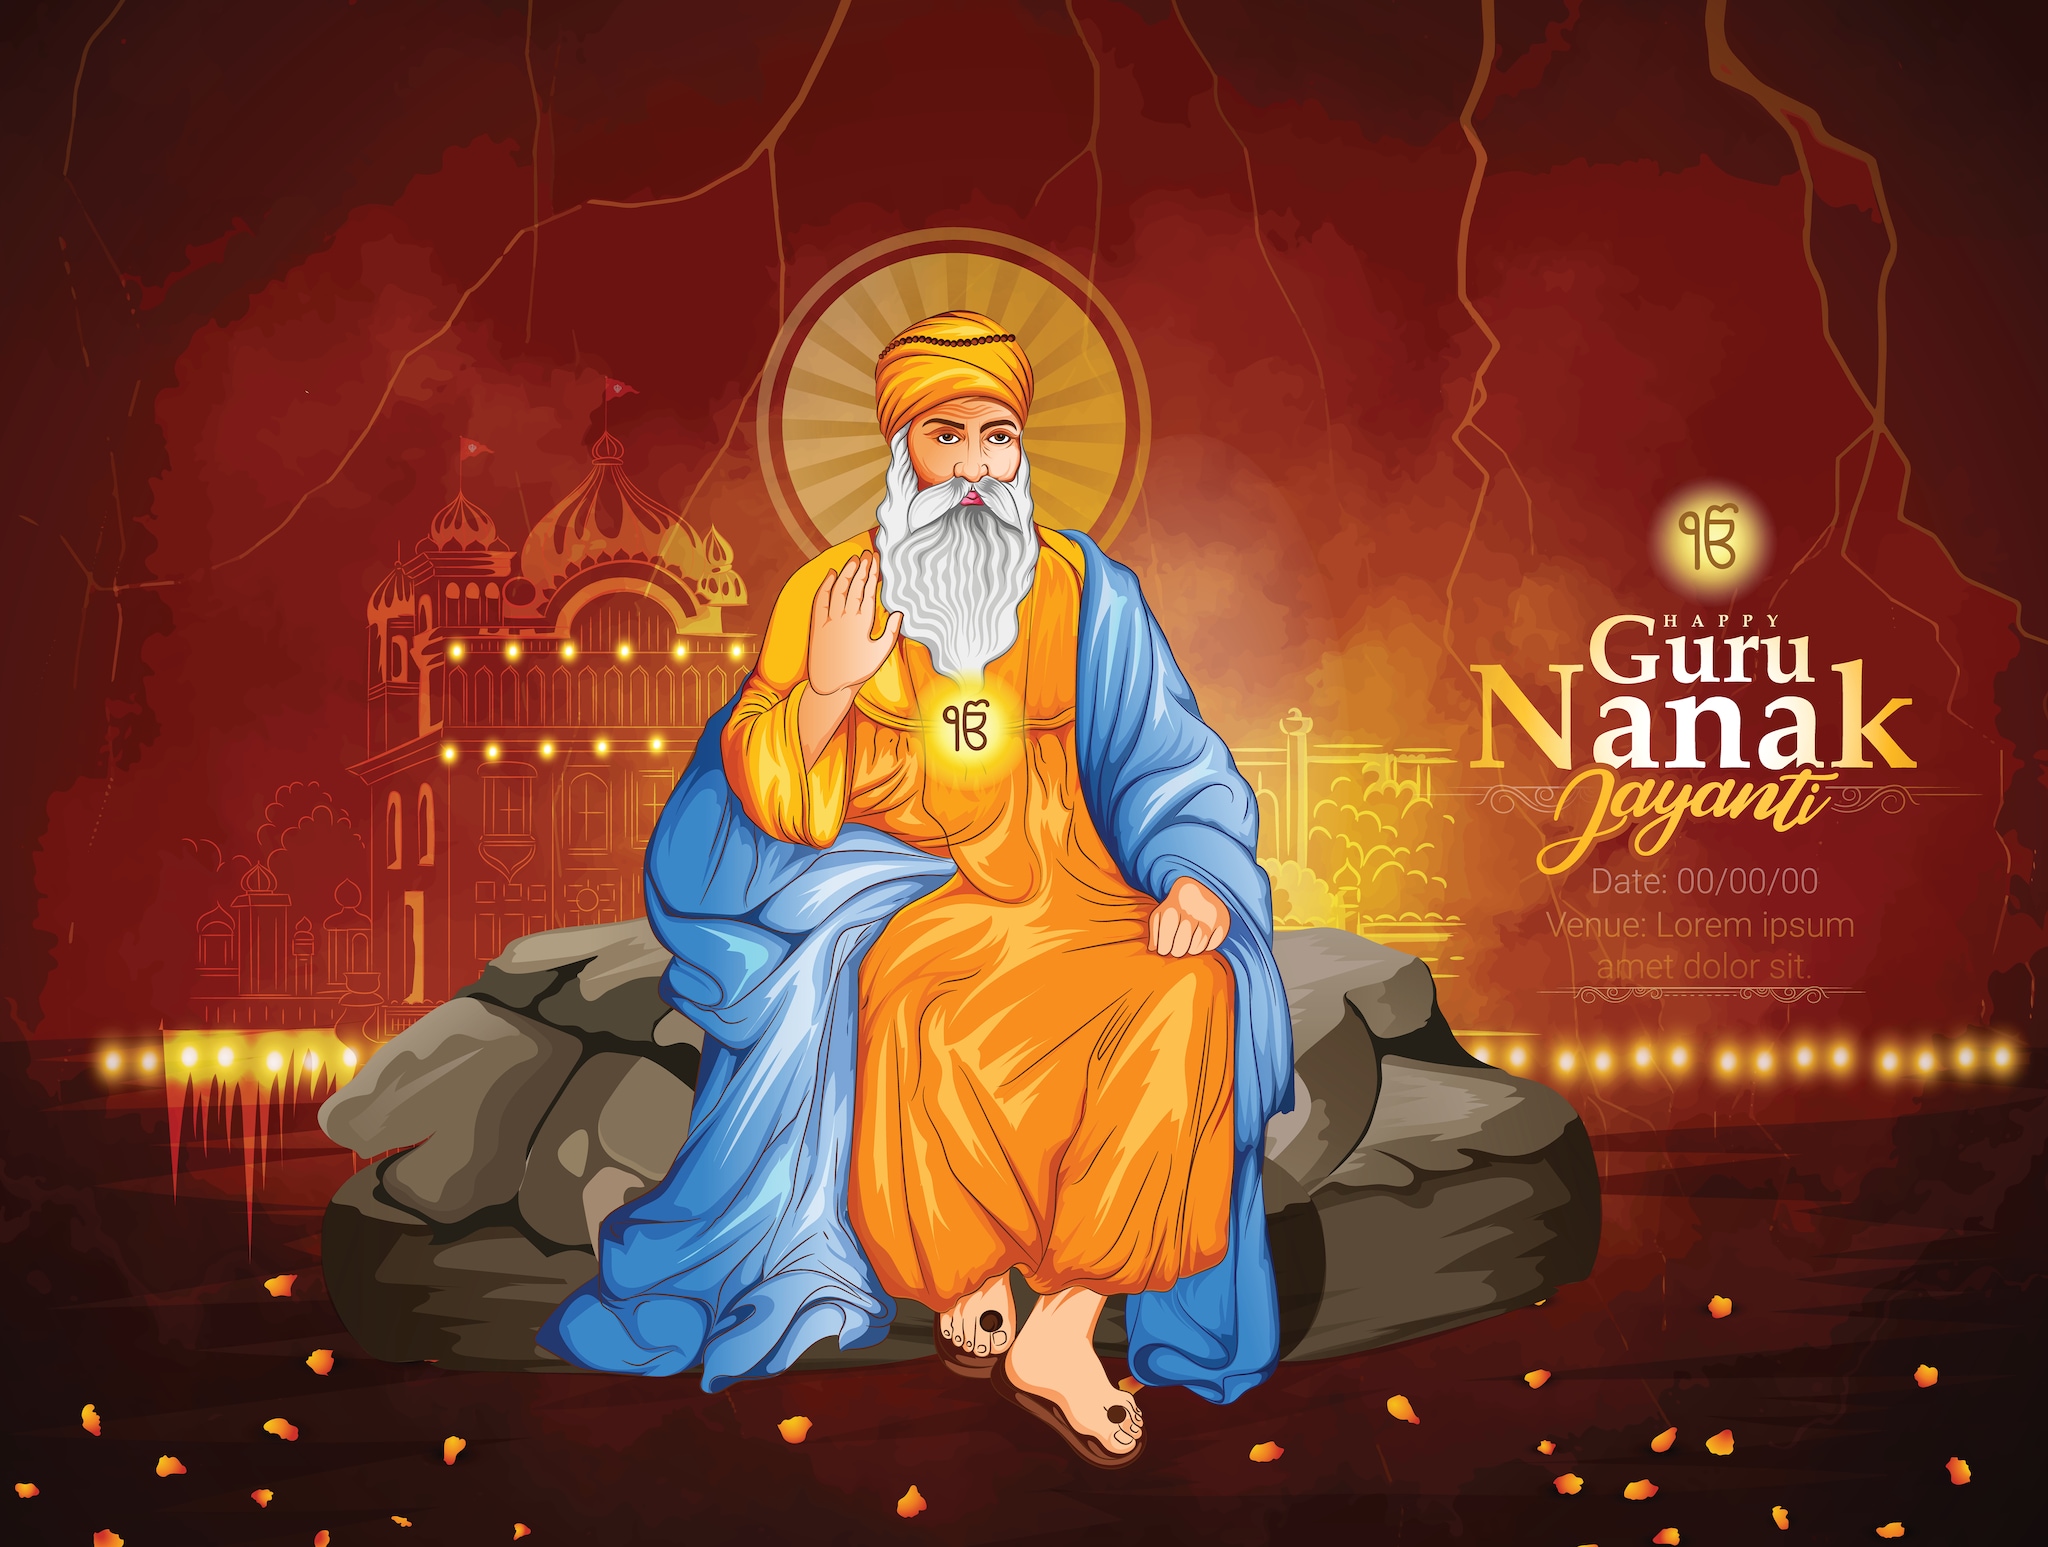 Guru Nanak Jayanti 2021 Wishes 2021 Wallpapers, Images, Quotes, Status, Photos, Images, SMS, Messages.  (Image: Shutterstock)